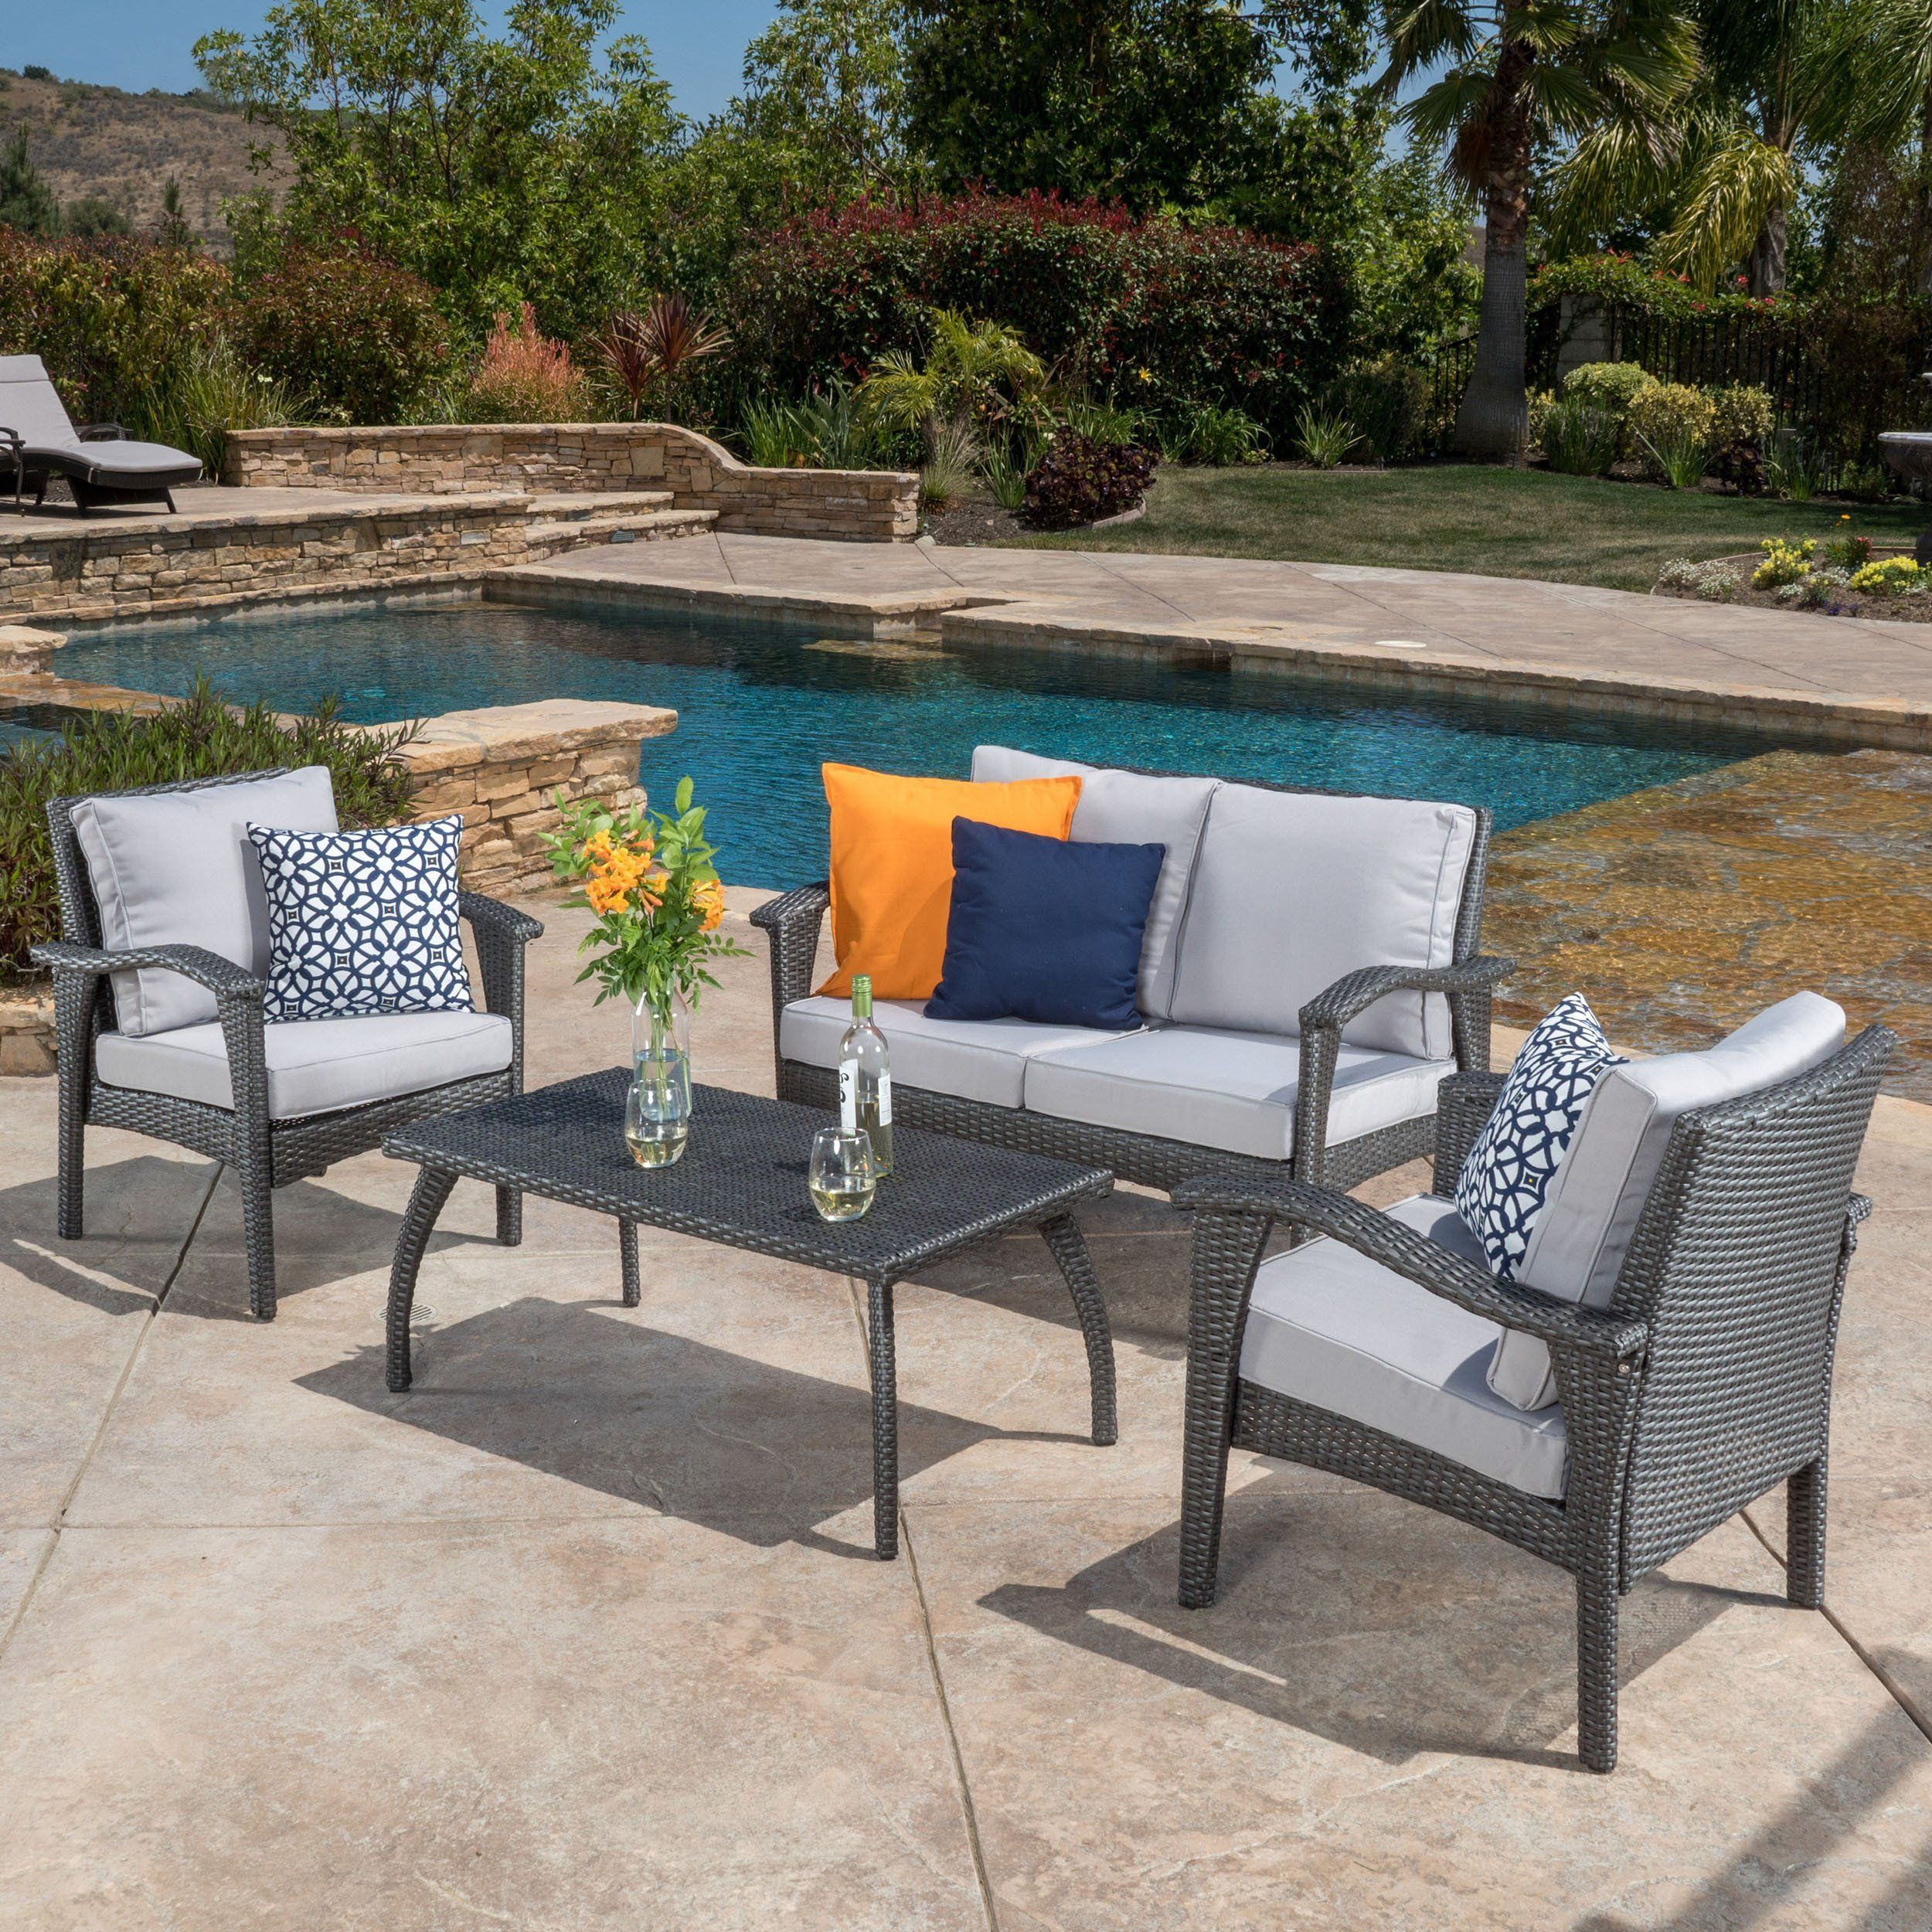 Voyage Outdoor 4 Piece Gray Wicker Chat Set With Cushions | Outdoor In Wicker Beige Cushion Outdoor Patio Sets (View 7 of 15)